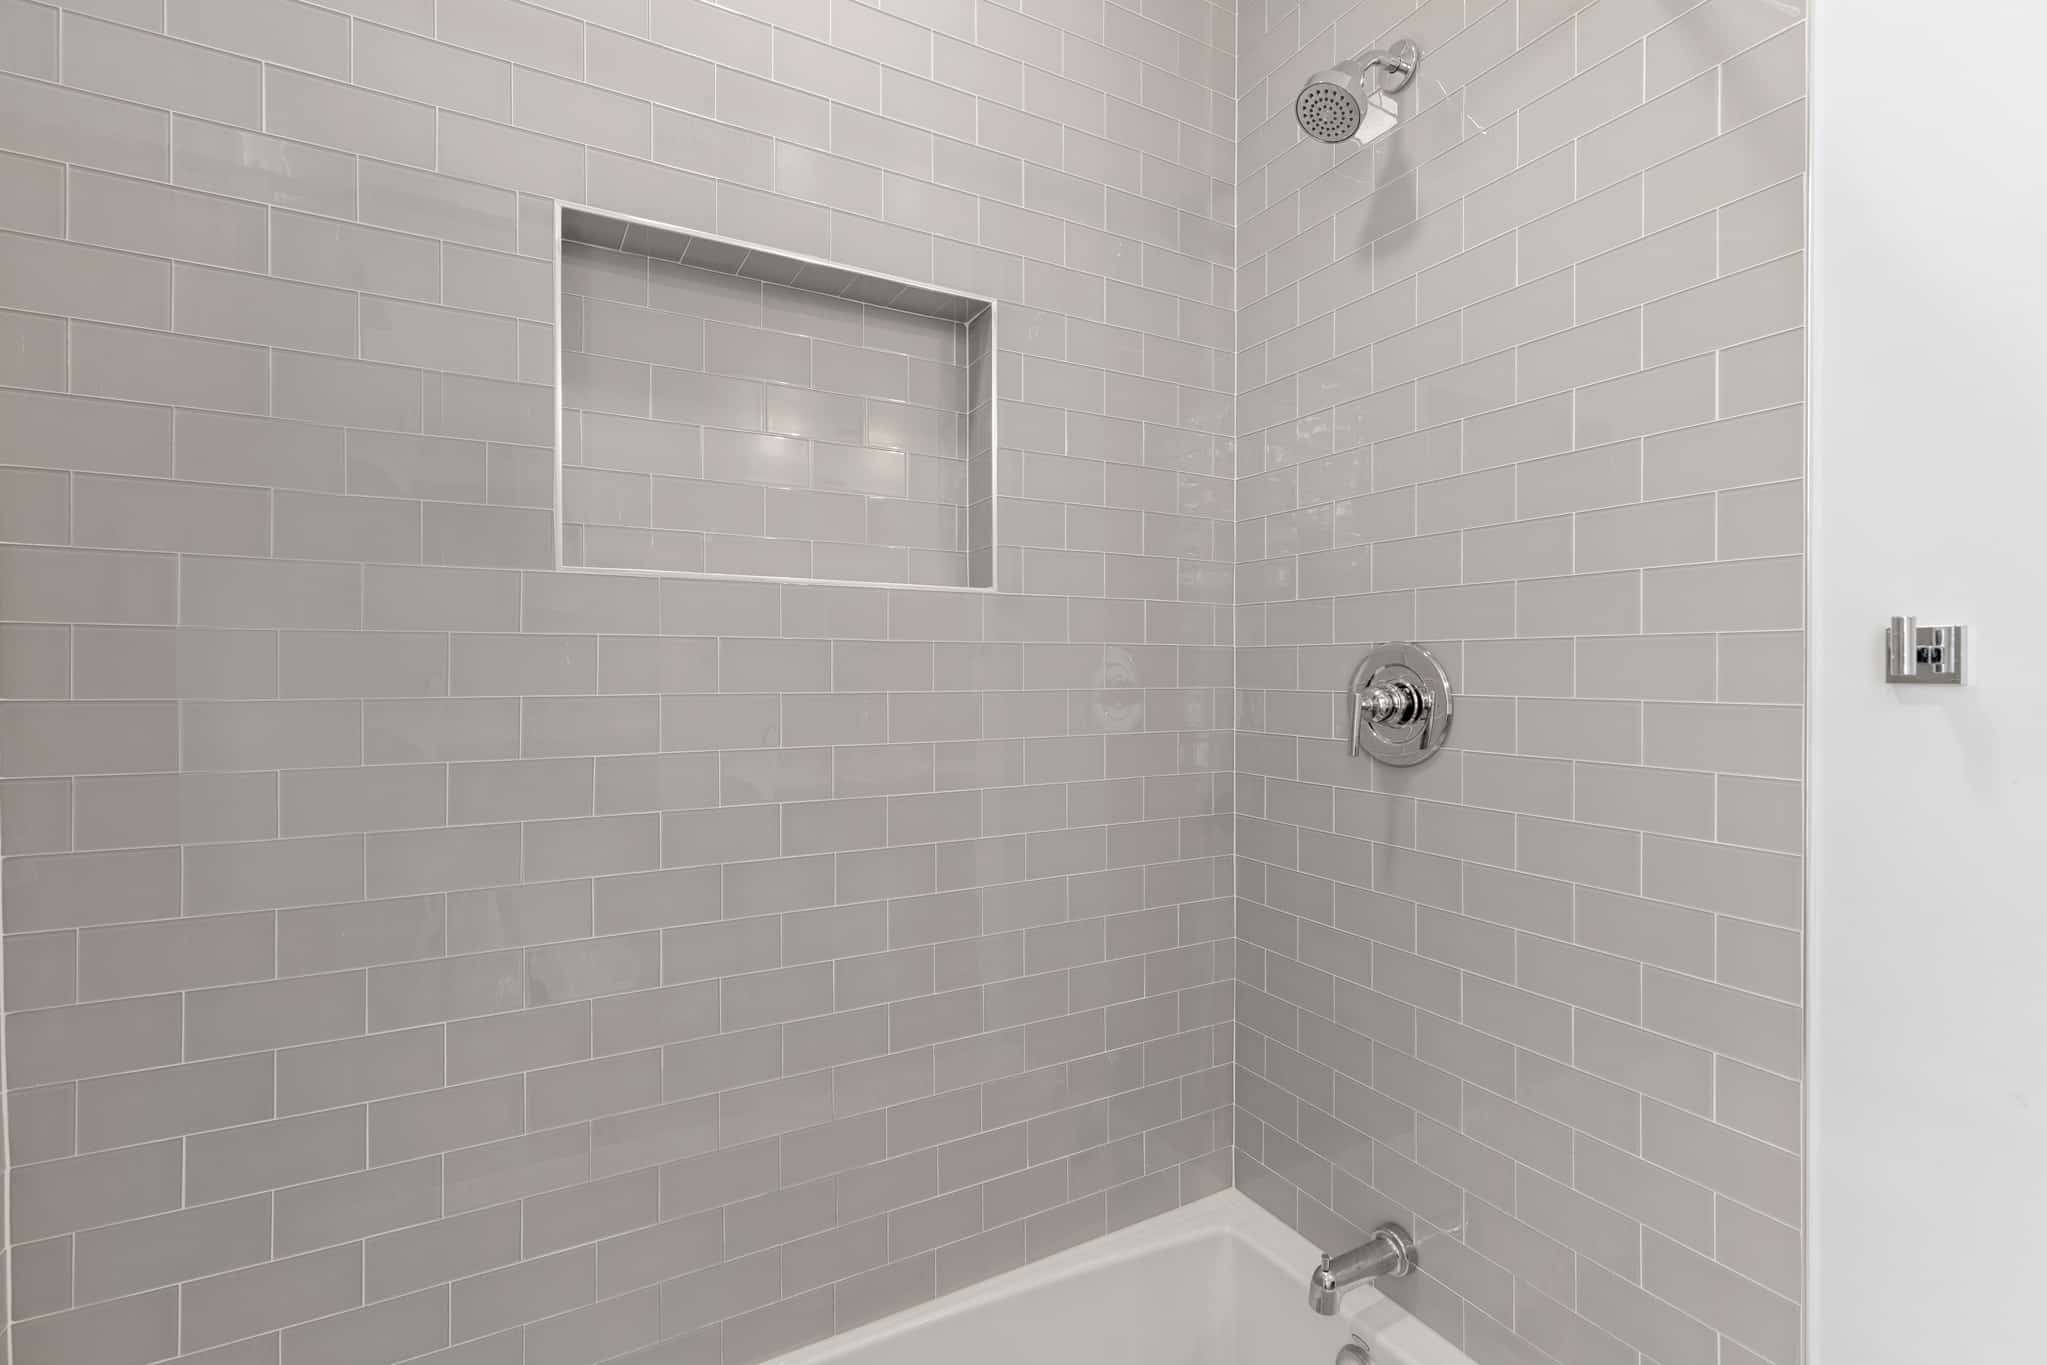 Shower with gray walls